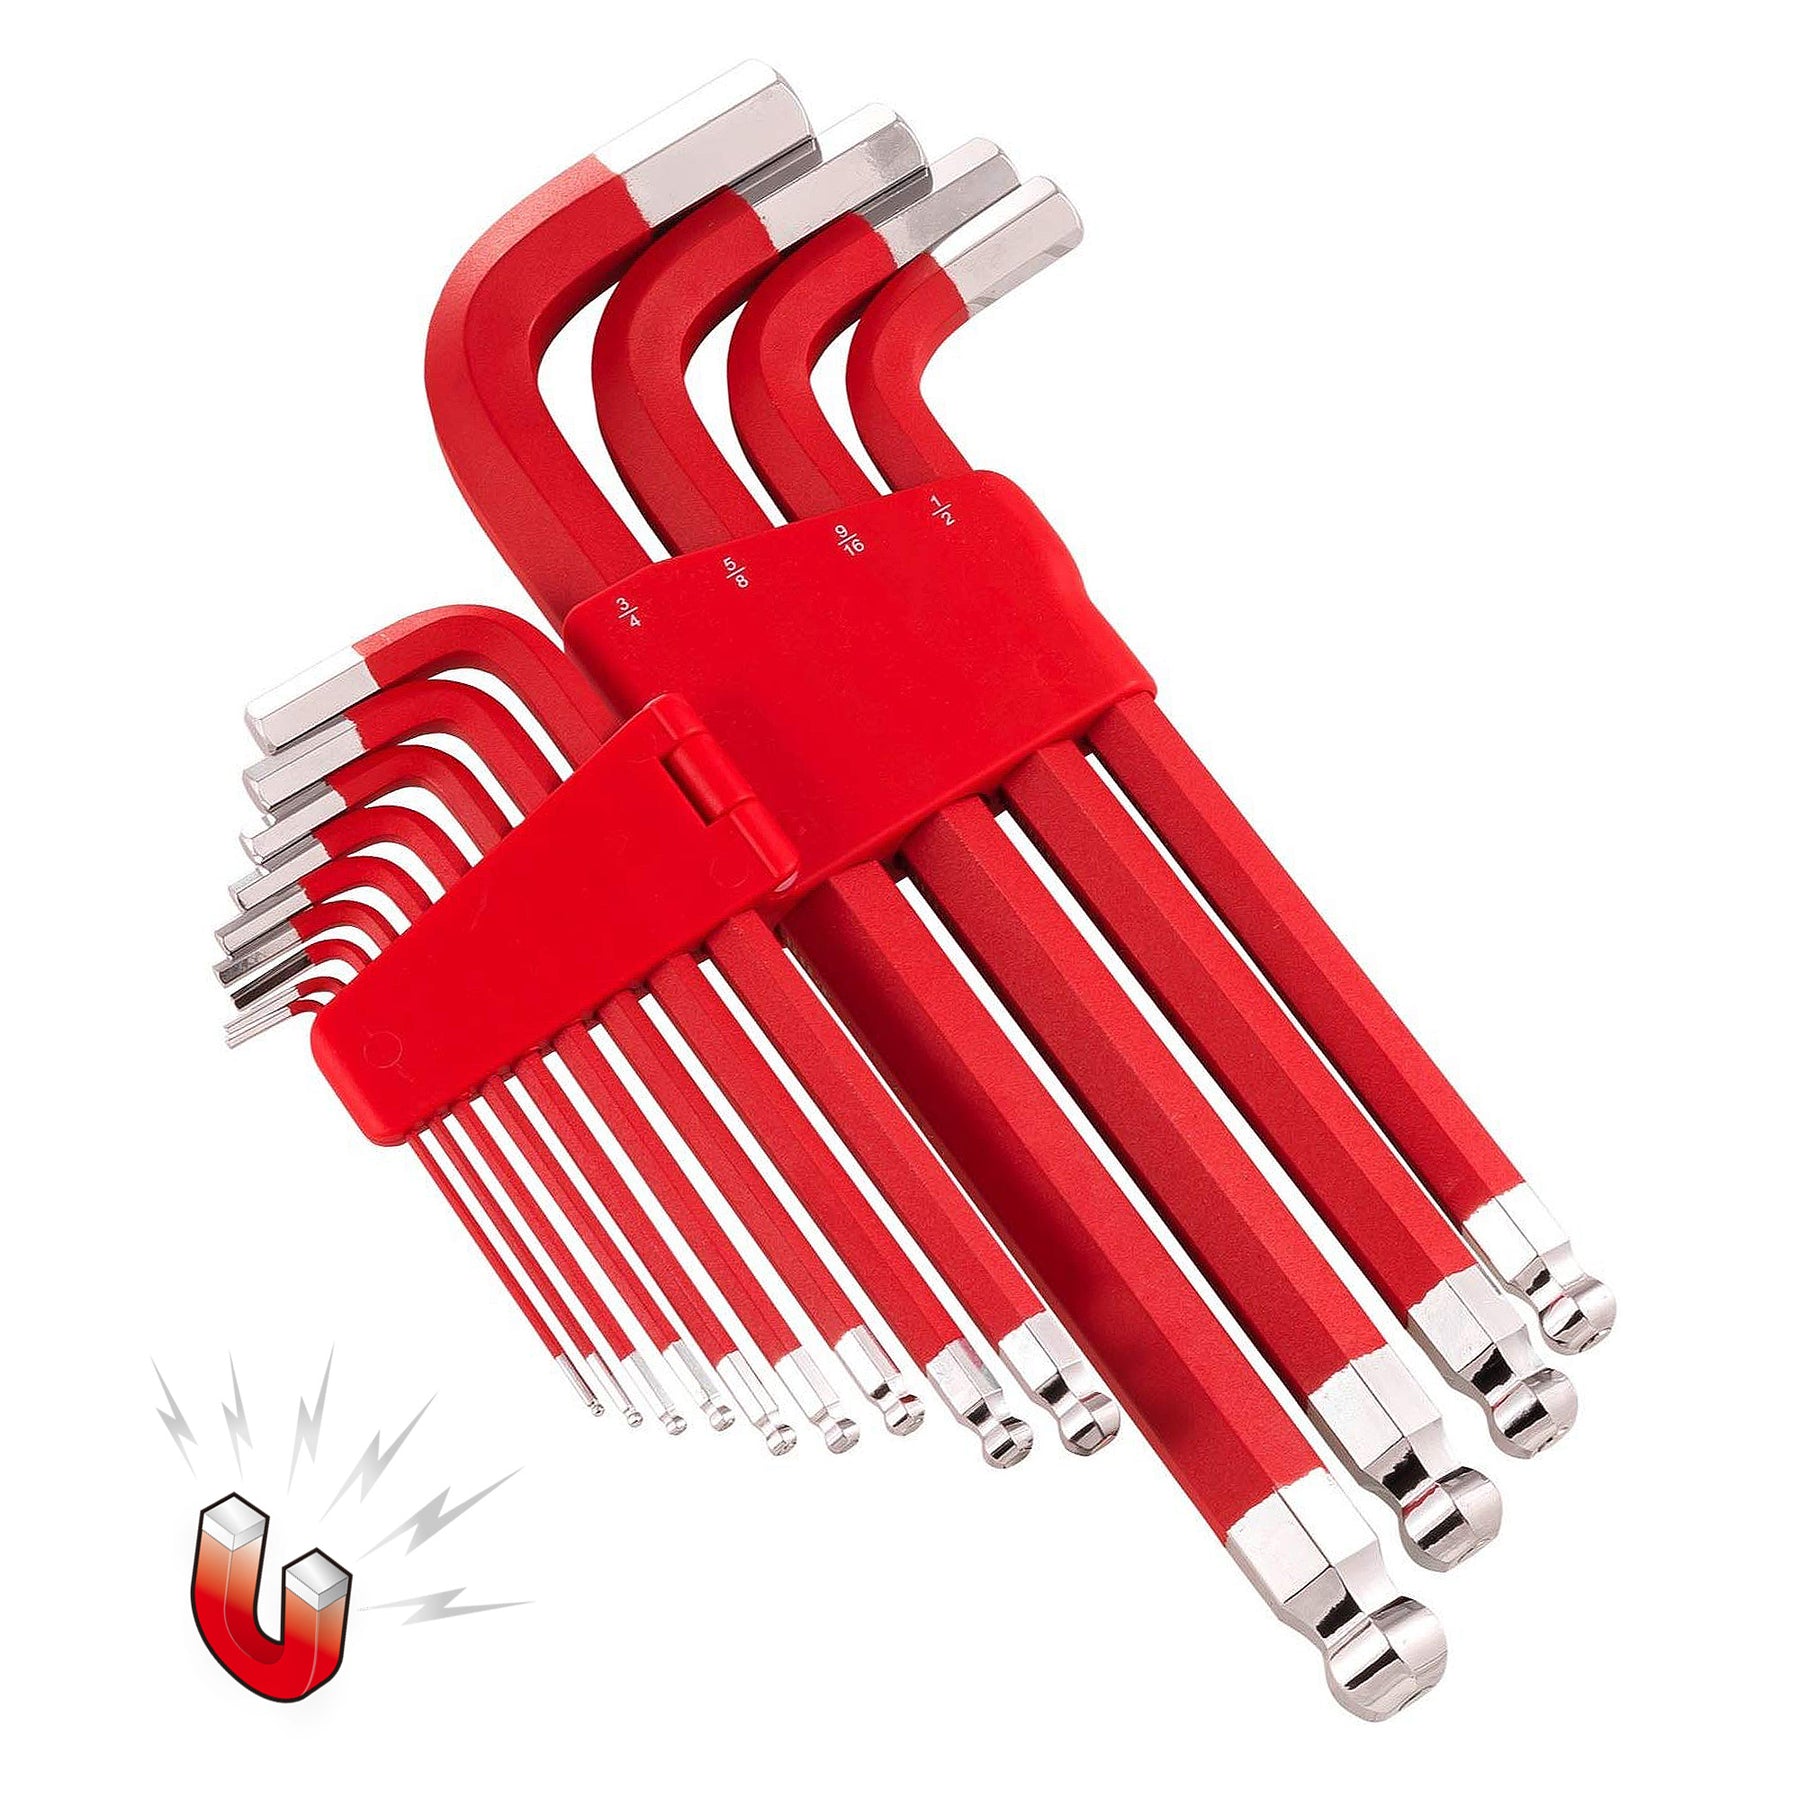 13 Piece SAE Long Arm Magnetic Hex Key Wrench Set